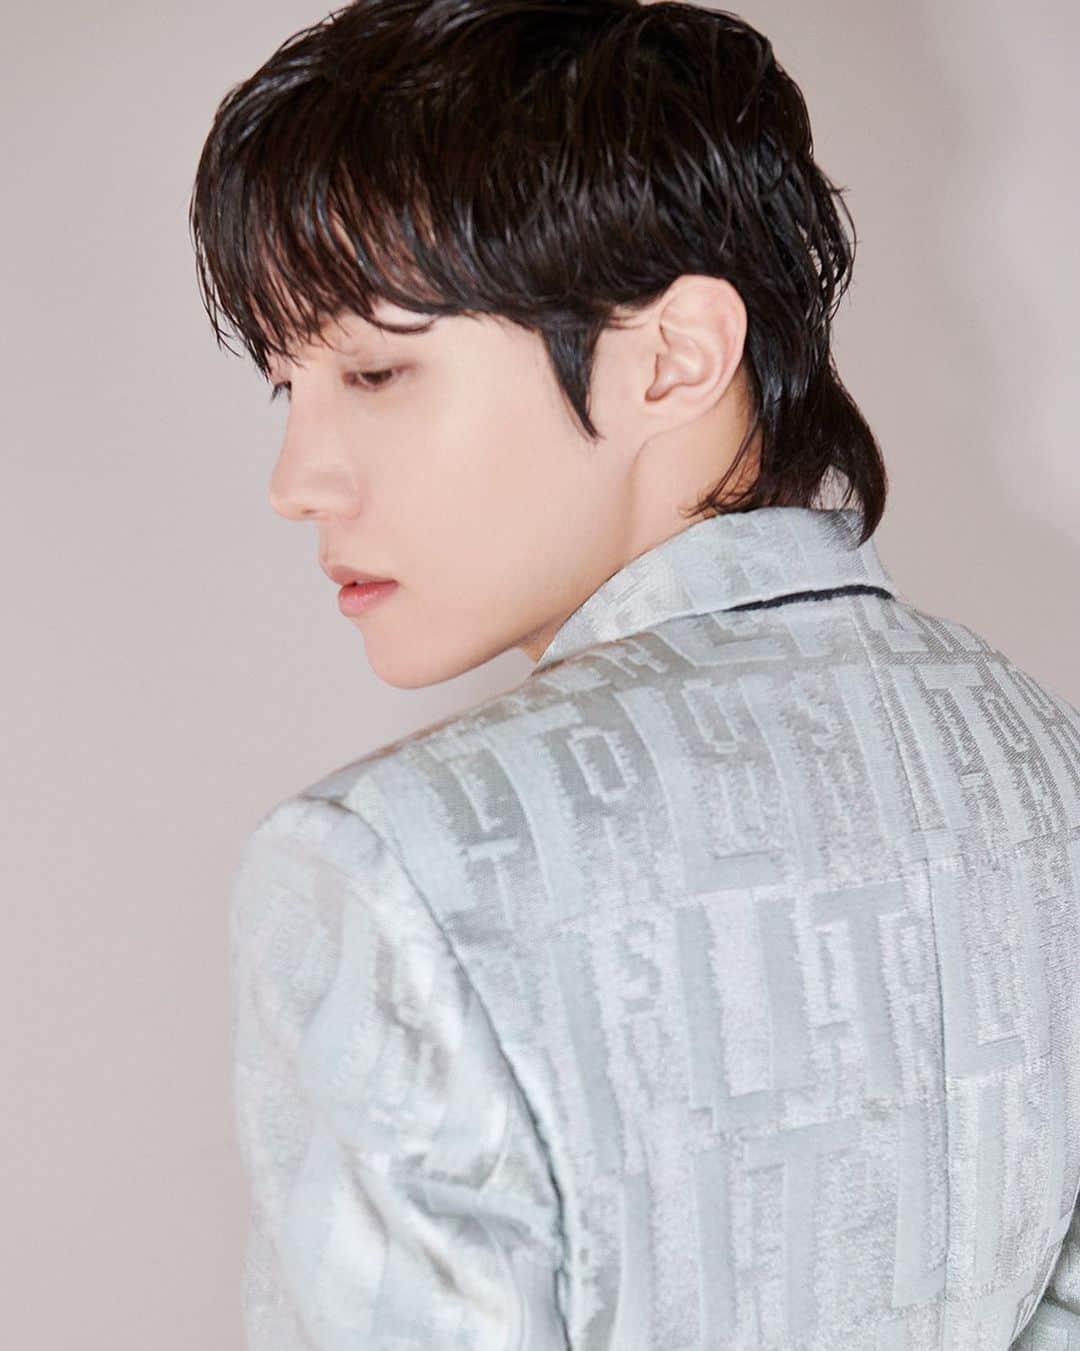 J-HOPEのインスタグラム：「@uarmyhope joins as new #LouisVuitton House Ambassador. The Maison is delighted to welcome the South Korean artist, who brings his unique charm and style to this exciting new chapter. #jhope #BTS」